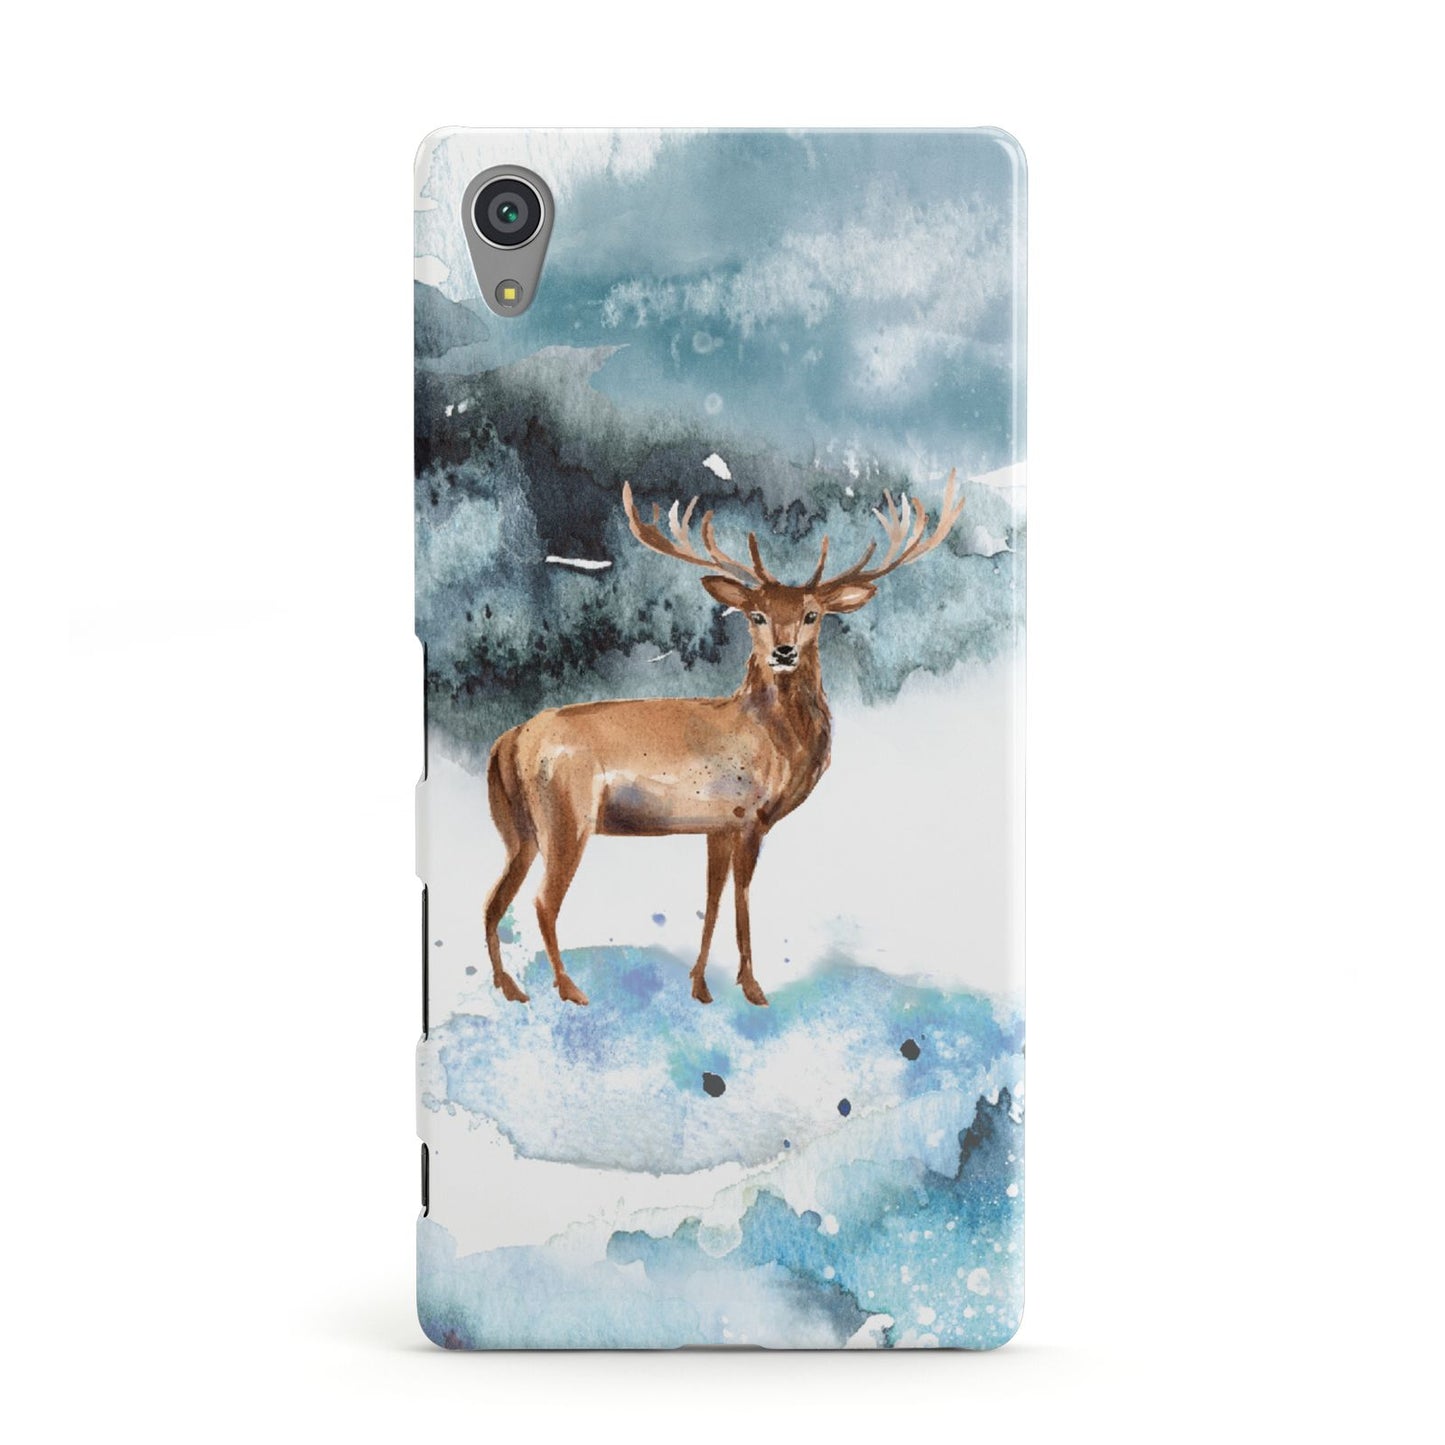 Christmas Winter Stag Sony Xperia Case